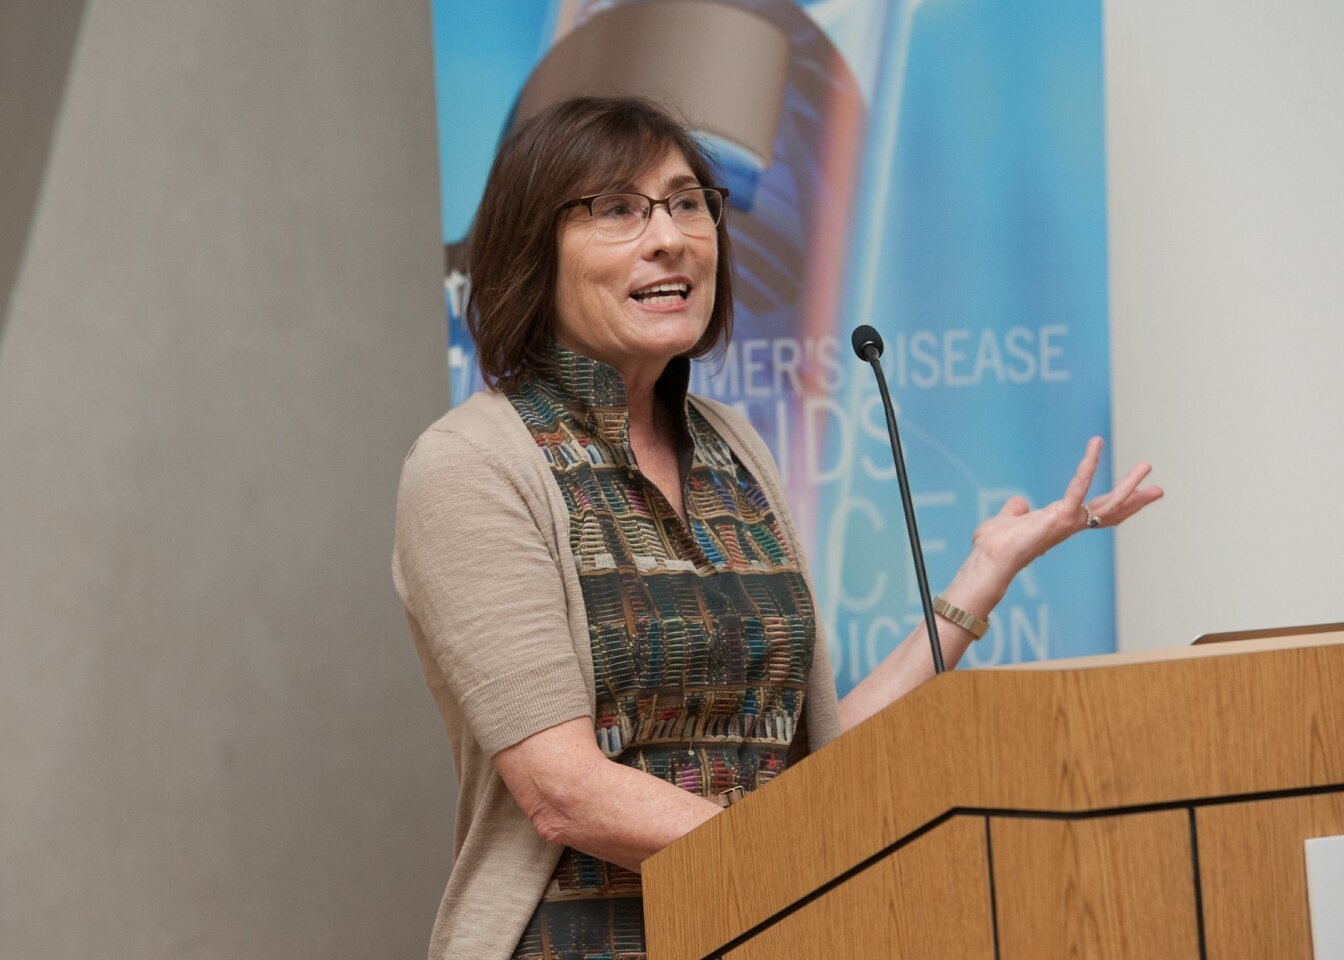 TSRI immunologist Linda Sherman, Ph.D., kicks off The Scripps Research Institute's inaugural lecture series, ResearcHERS, for a look at biomedical research and the work of women in the field on Oct. 21, 2015.